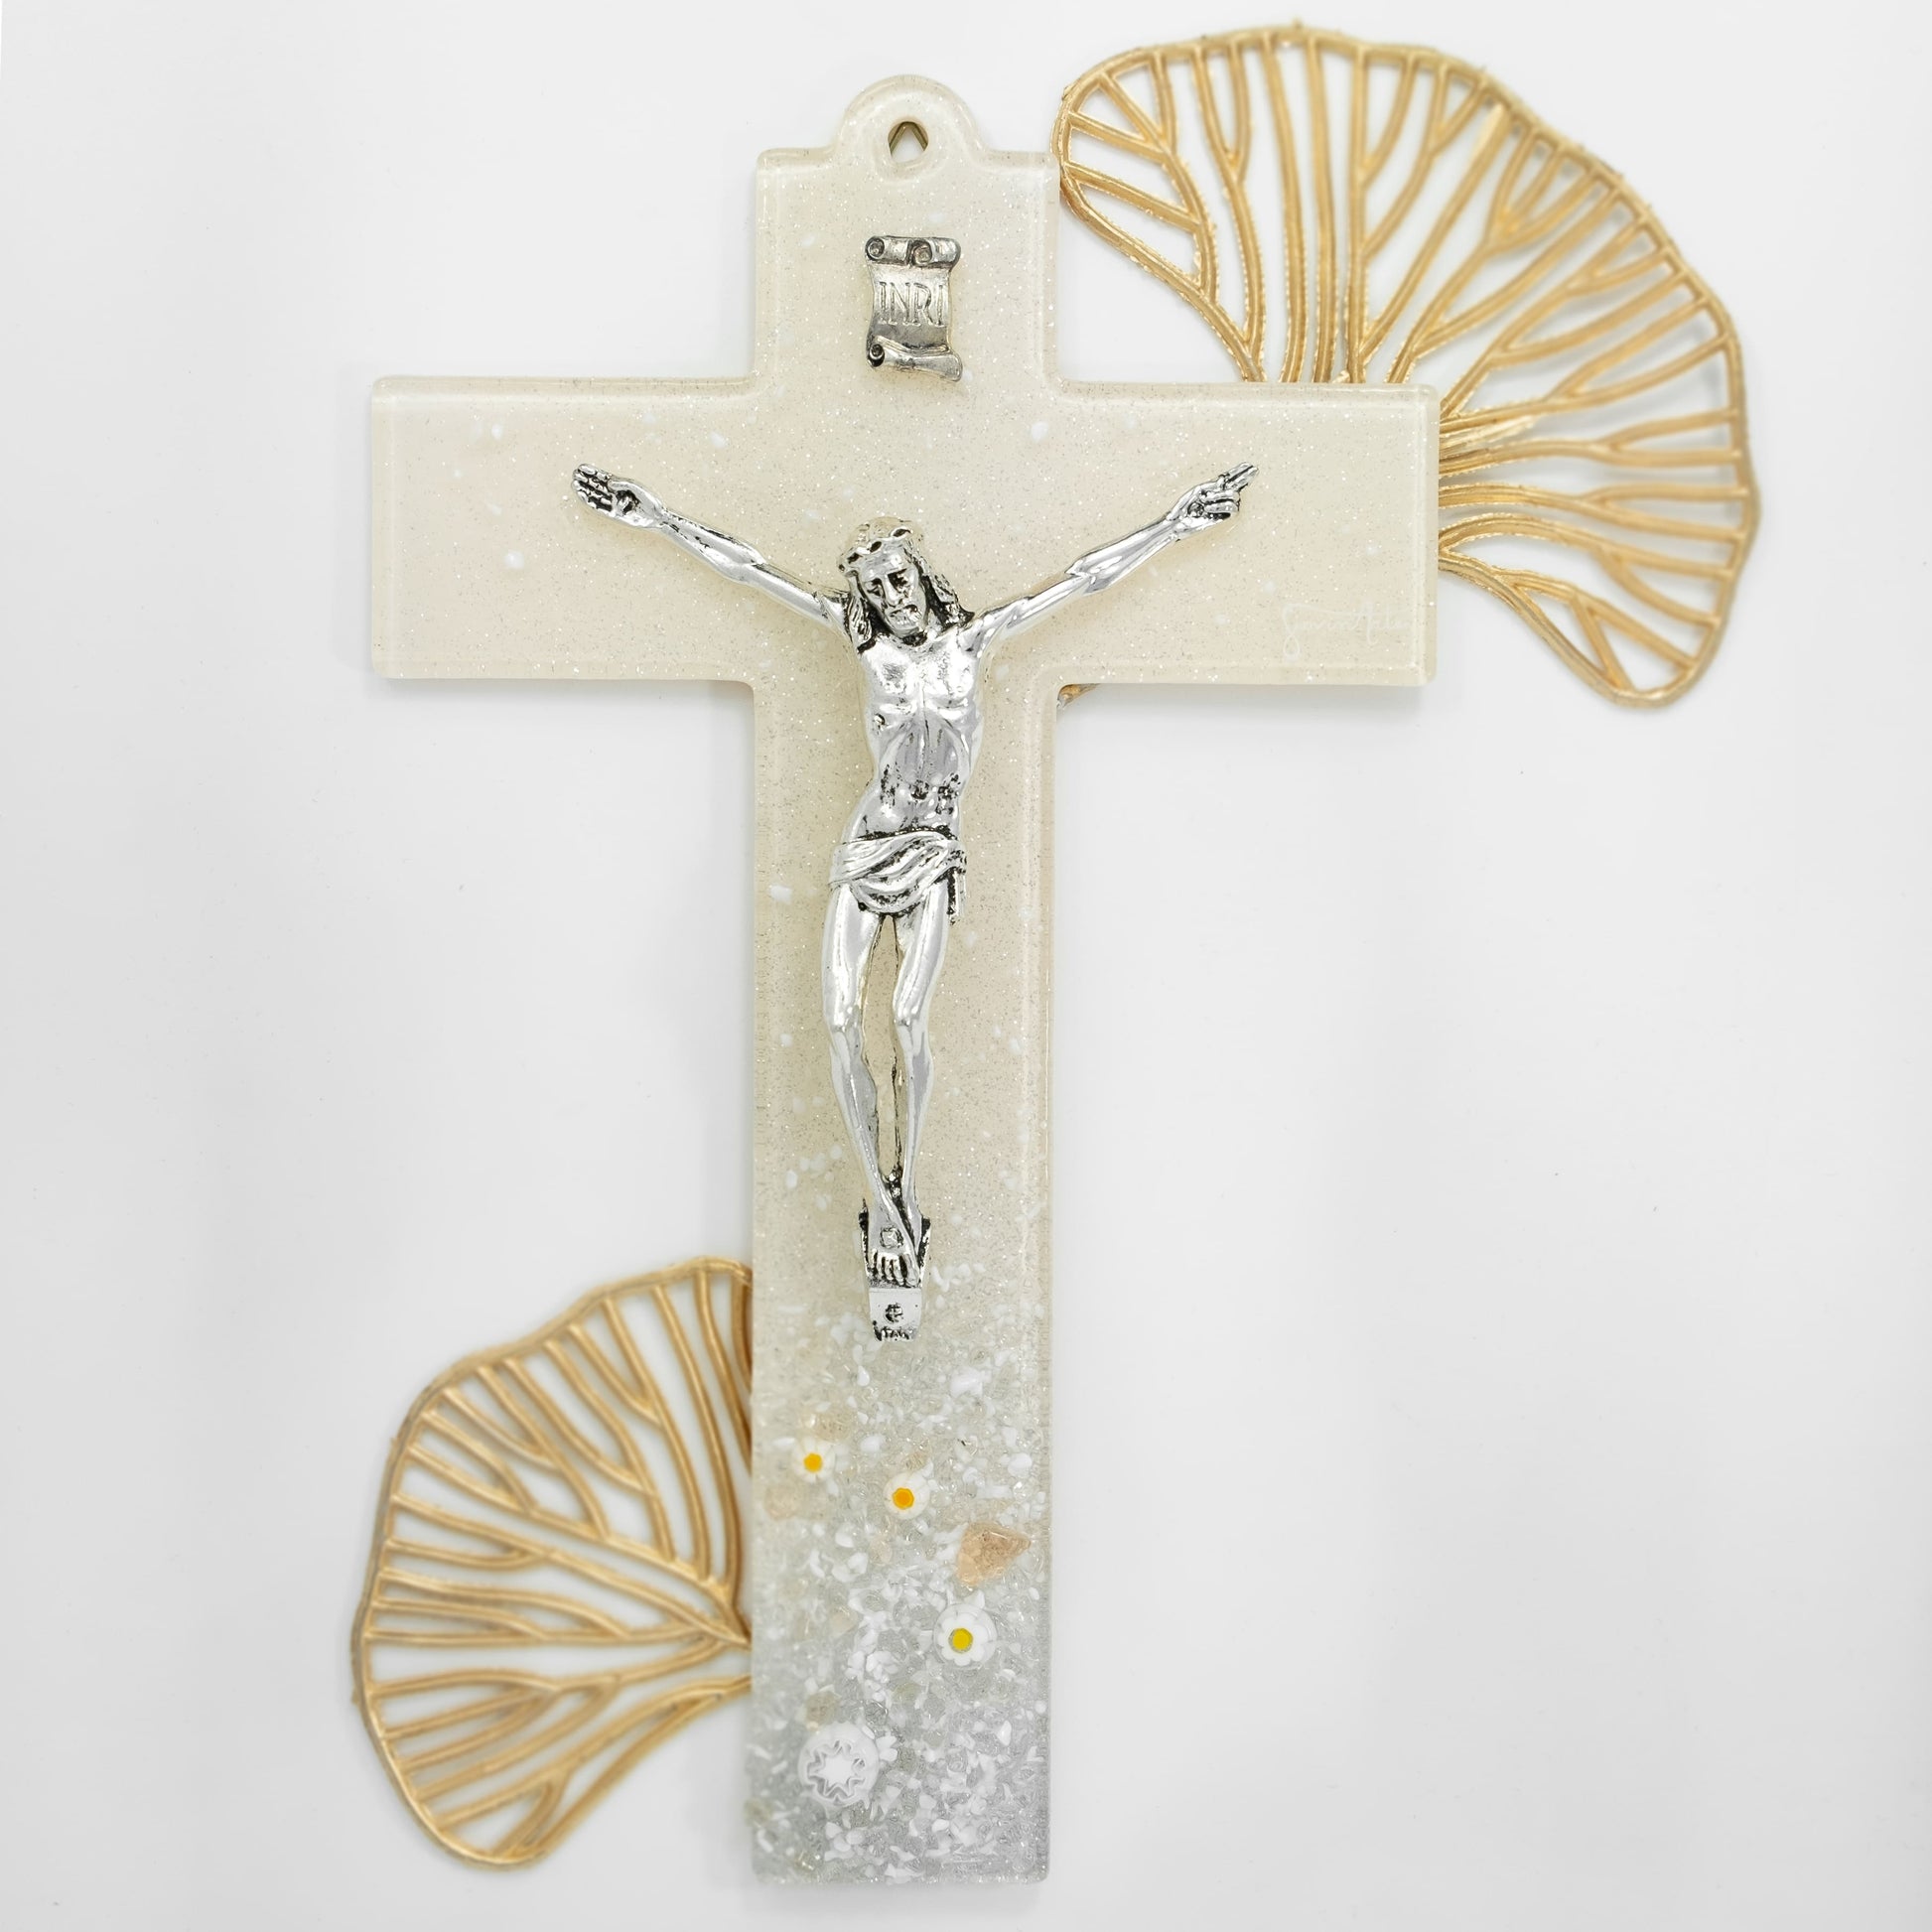 MONDO CATTOLICO Wall Flat Cross in Murano Glass with Flowers